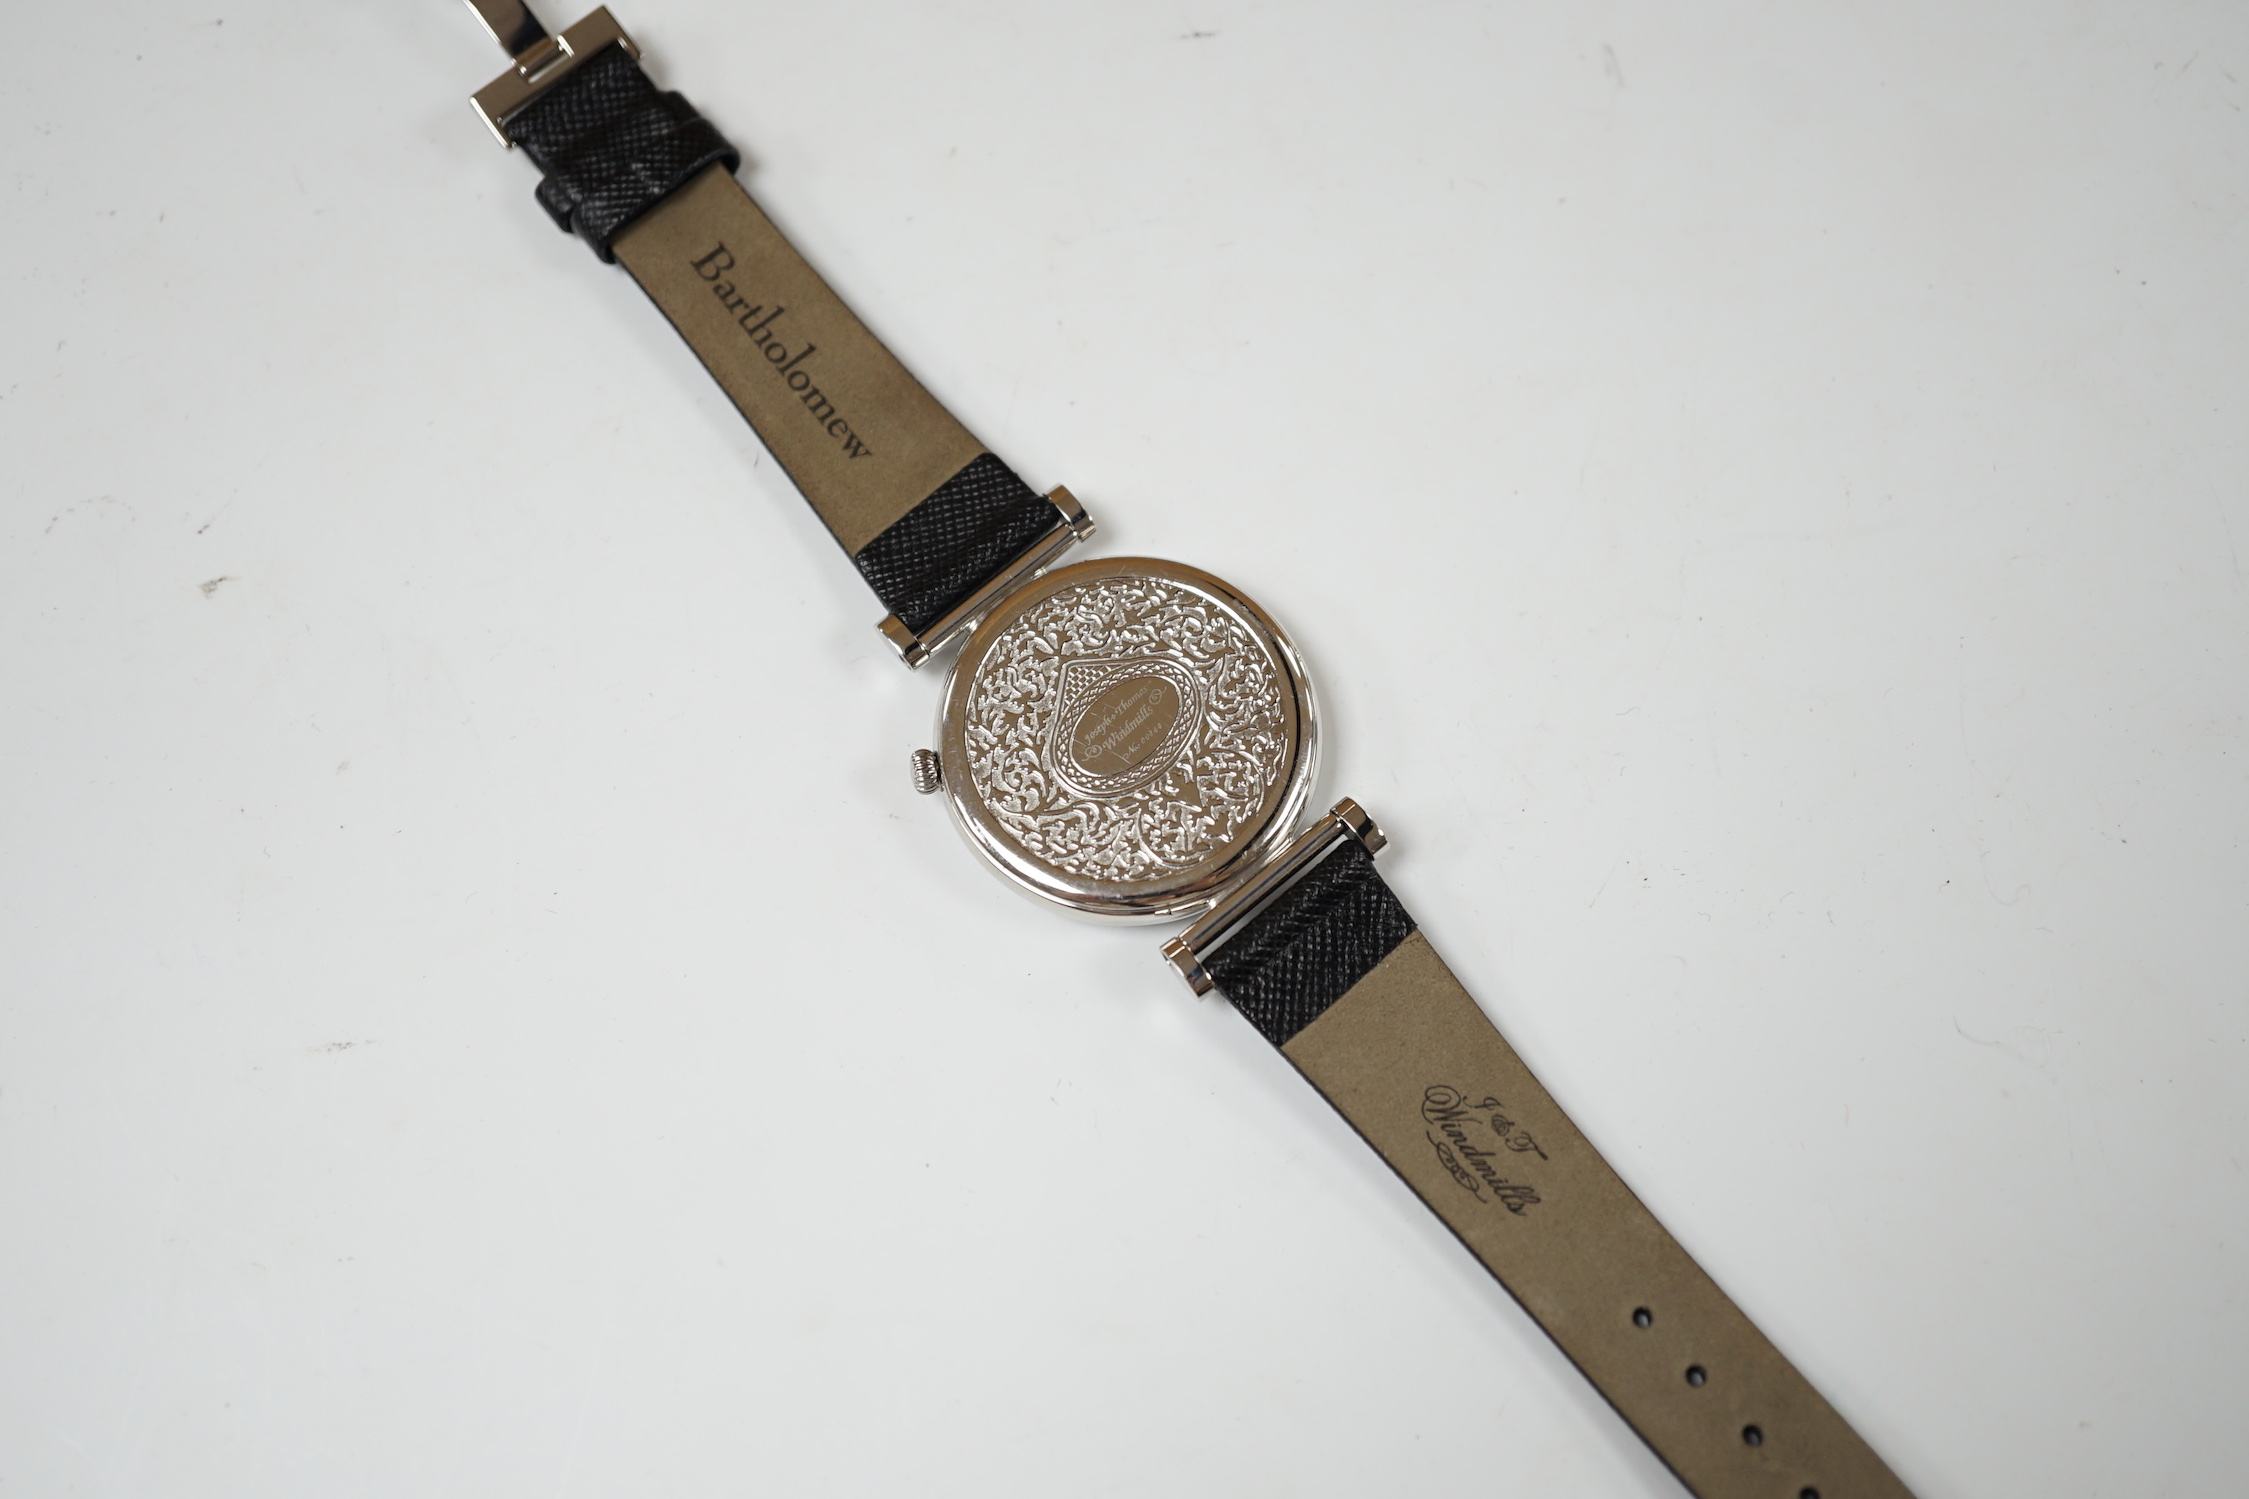 A gentleman's 2006 Joseph & Thomas Windmills Bartholomew First Edition white metal (stamped 950 for platinum) manual wind wrist watch, numbered 00144/00150, on leather strap with stainless steel deployment clasp, with or